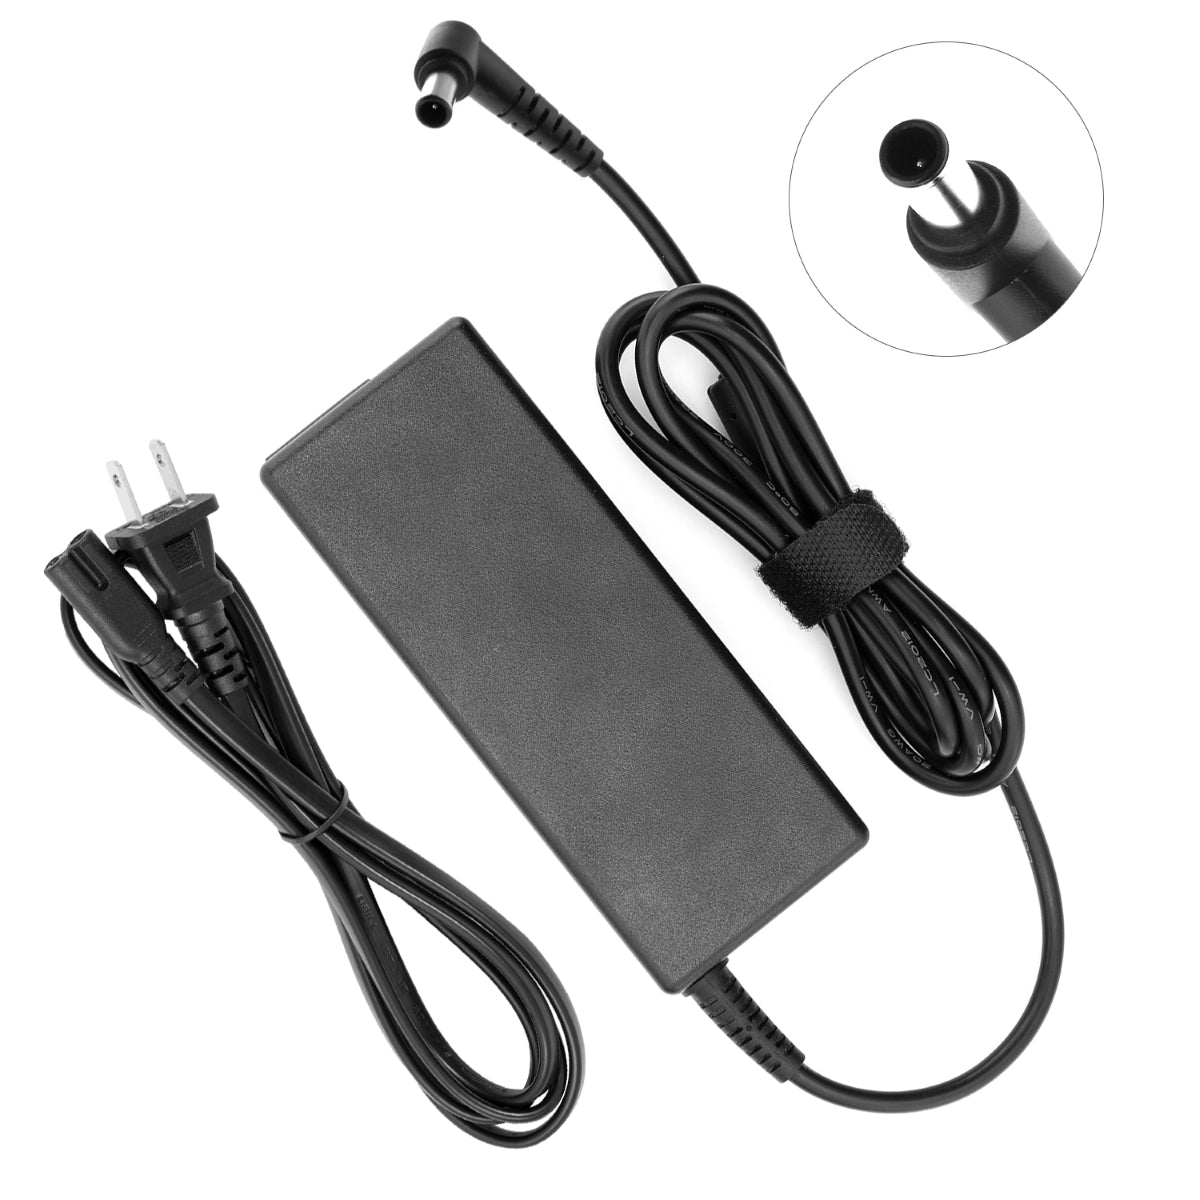 AC Adapter Power Supply for Samsung 27-inch C27F591FD LED Monitor Display